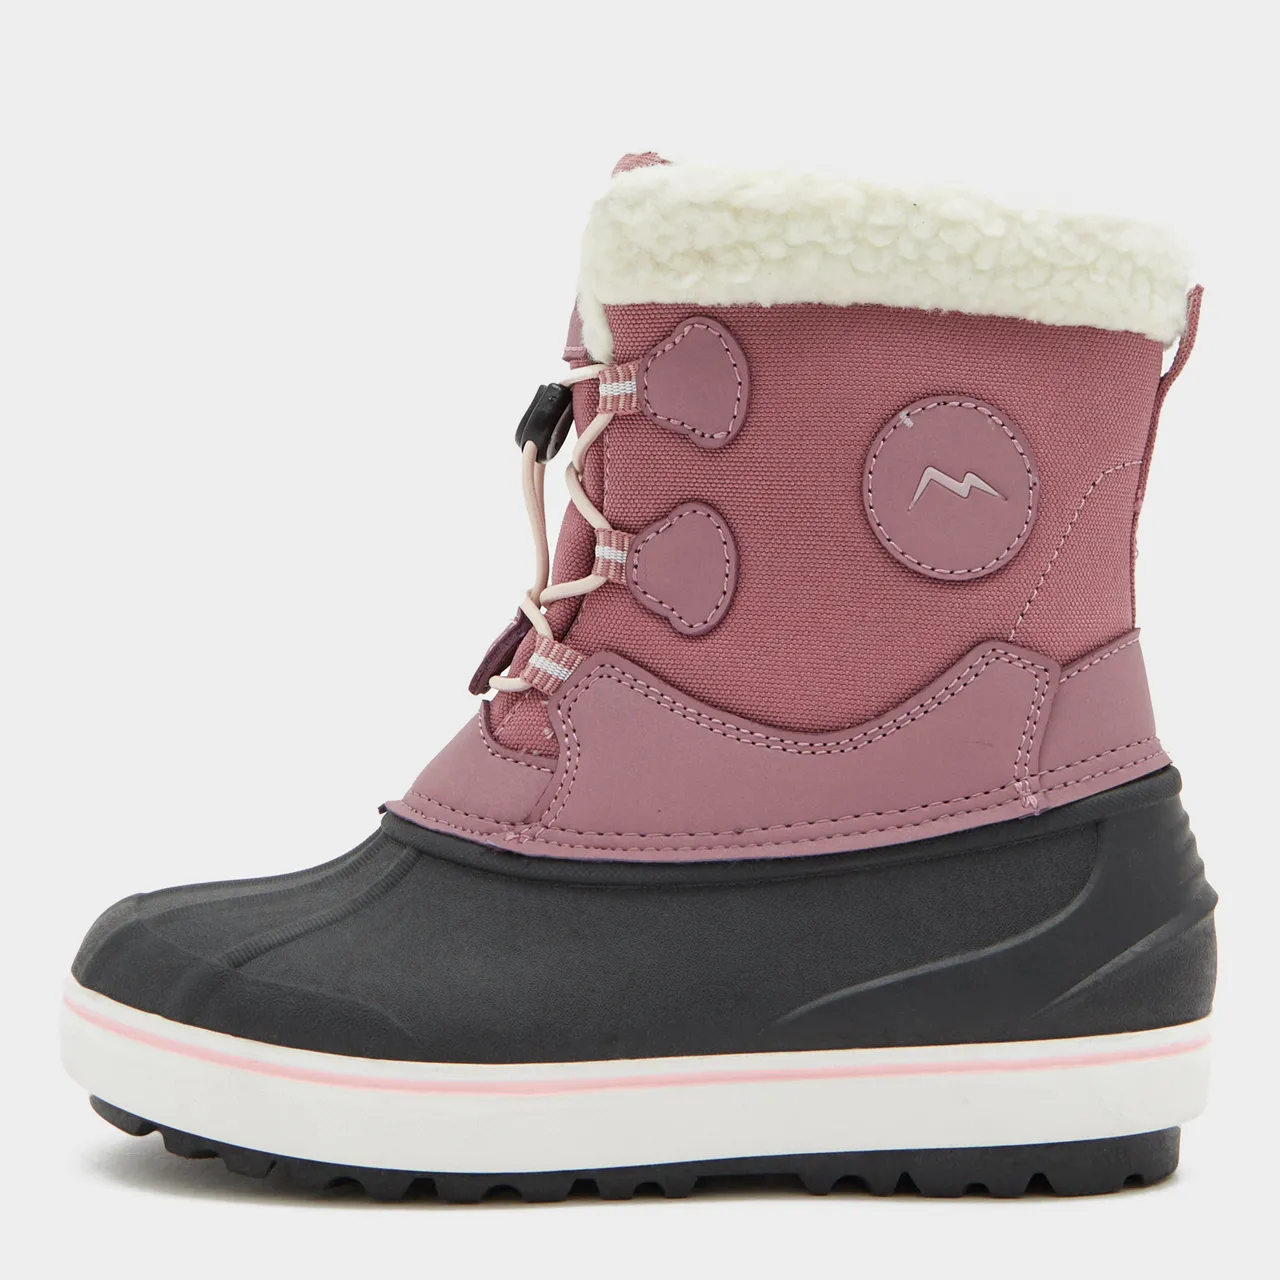 Kids' Frosty Snow Boots, Pink